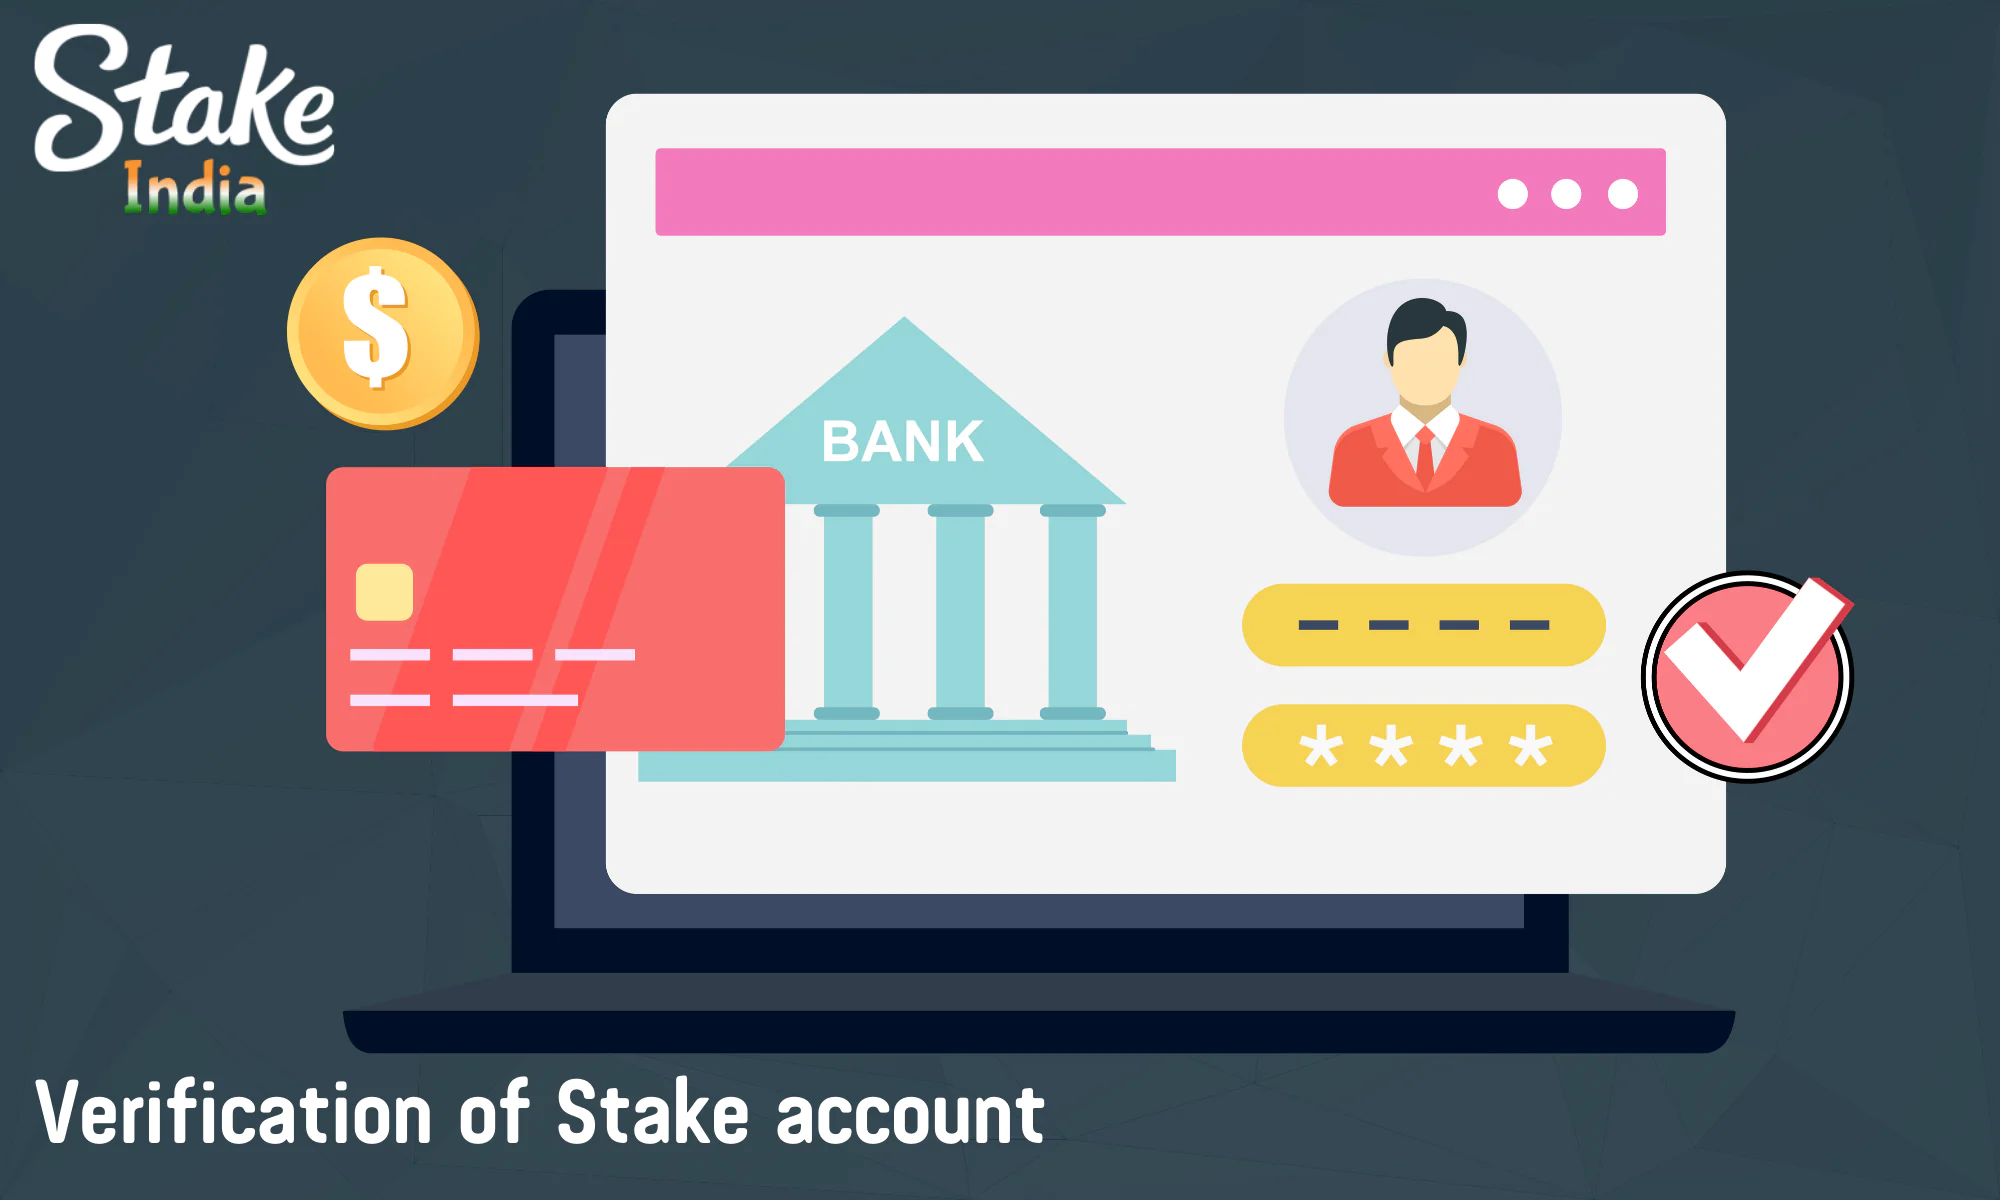 After registering a Stake account, you need to go through verification